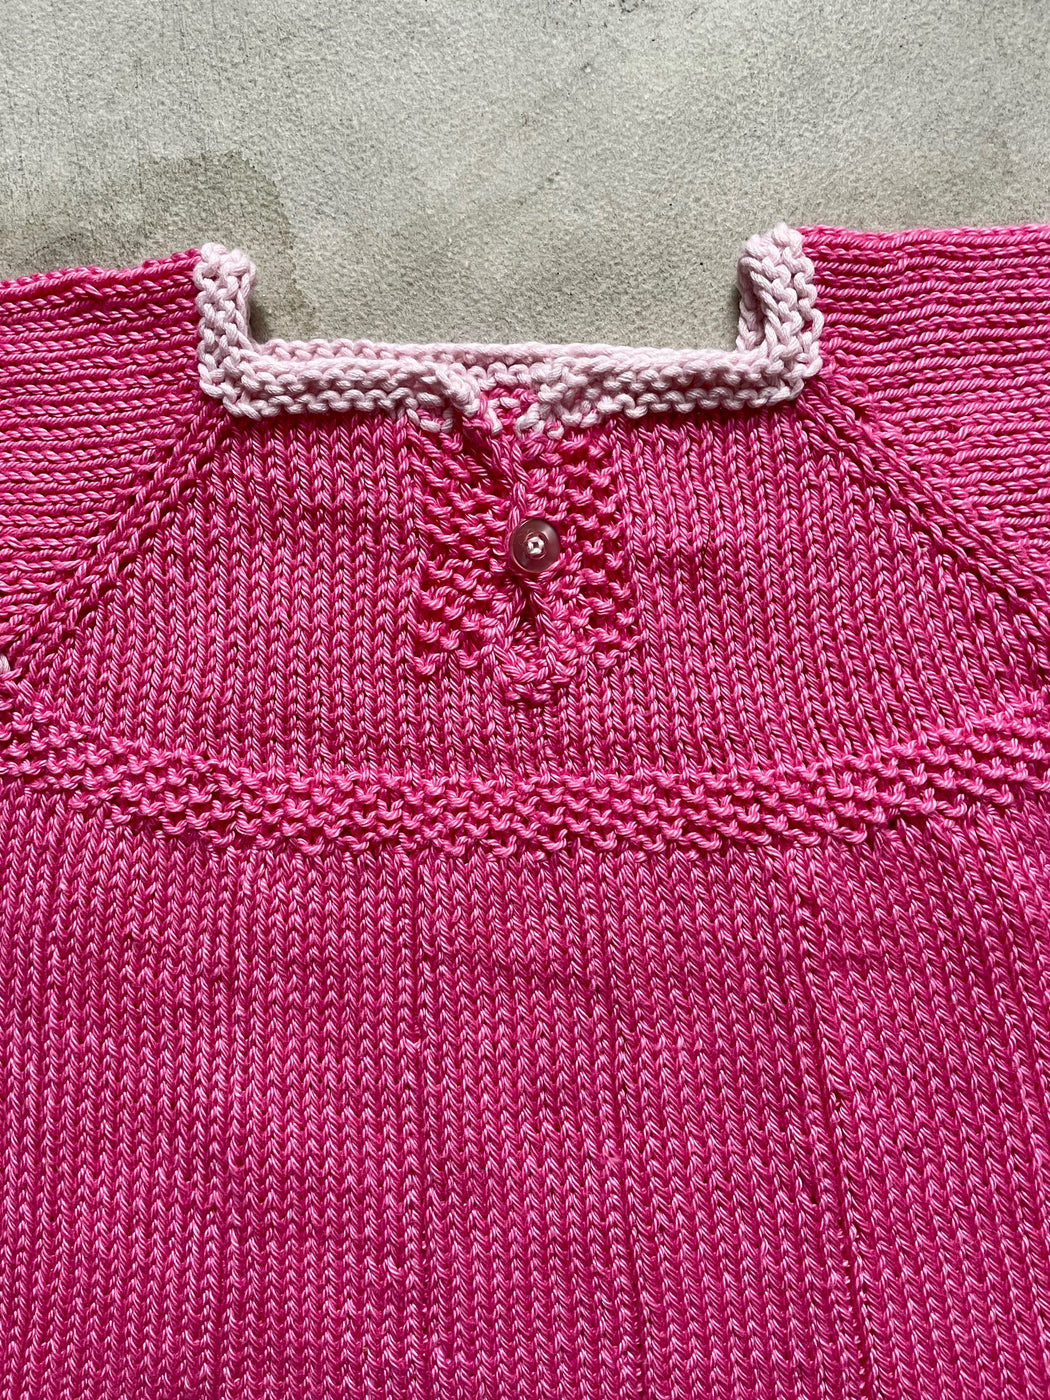 Hand-Knitted Cotton Baby Dress by Albo - Pink